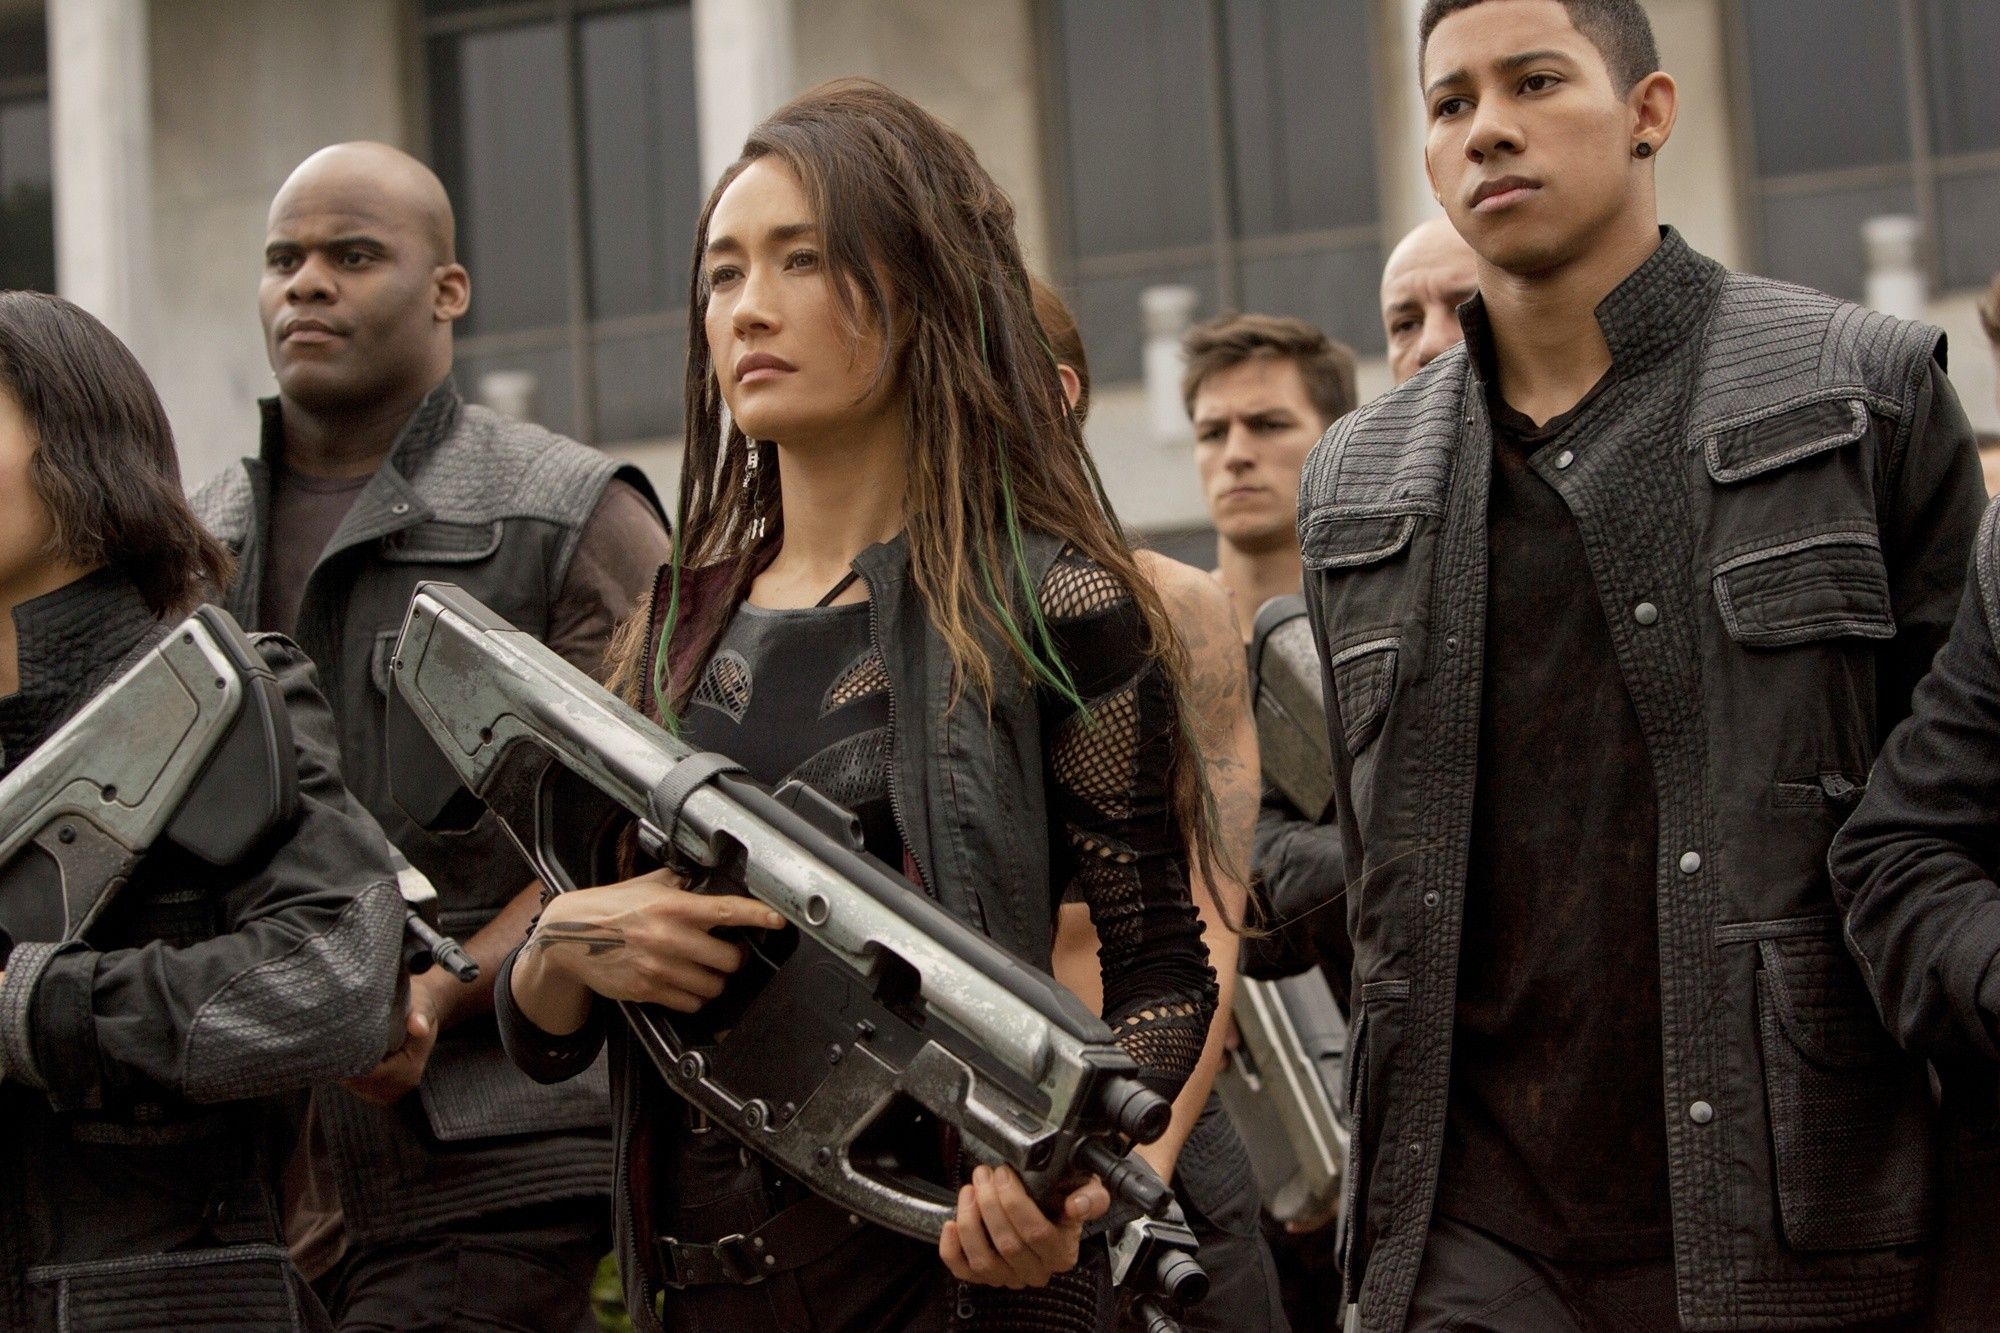 Maggie Q stars as Tori and Keiynan Lonsdale stars as Uriah in Summit Entertainment's The Divergent Series: Insurgent (2015)